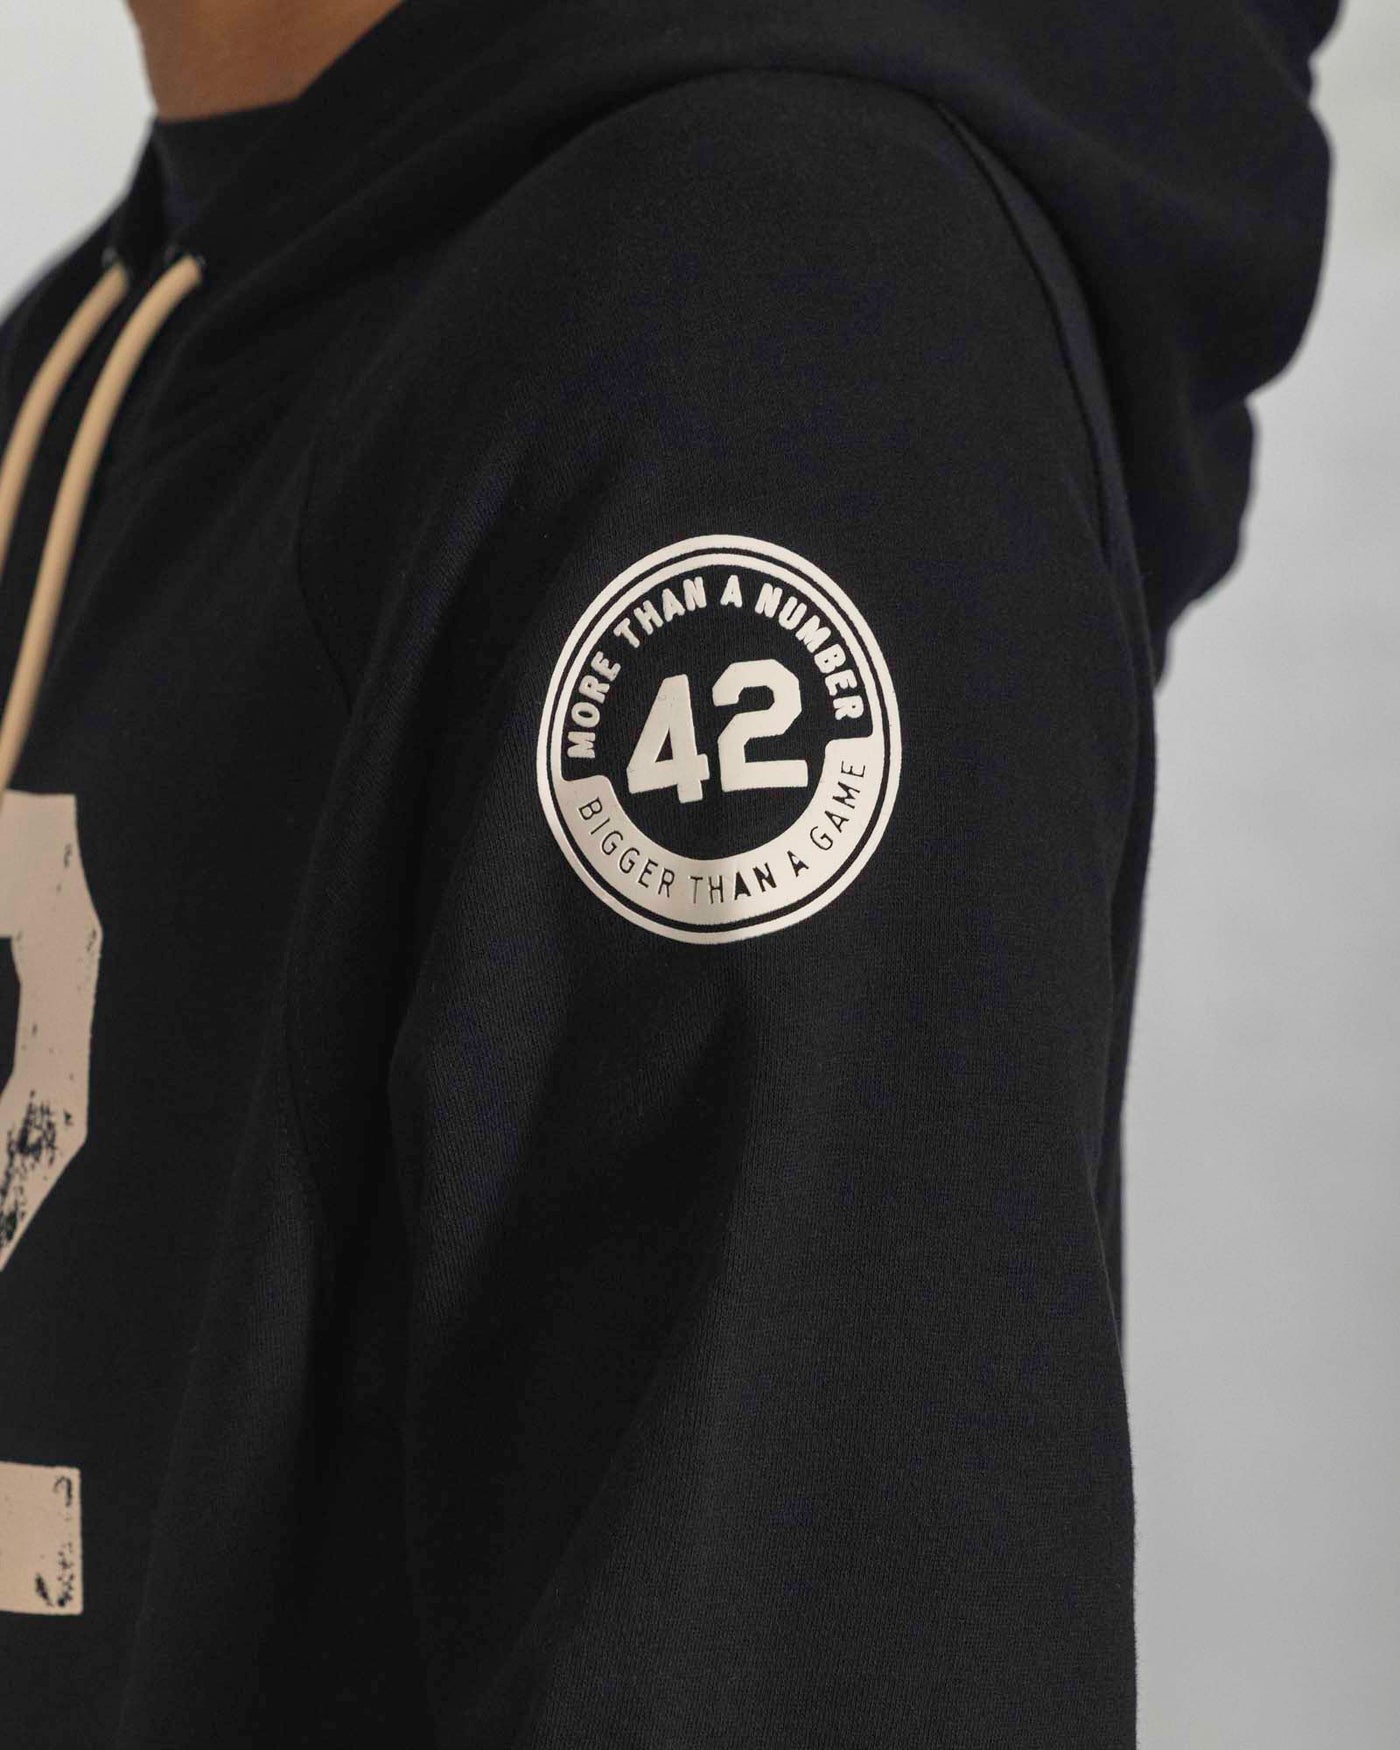 42: More Than a Number Hoodie